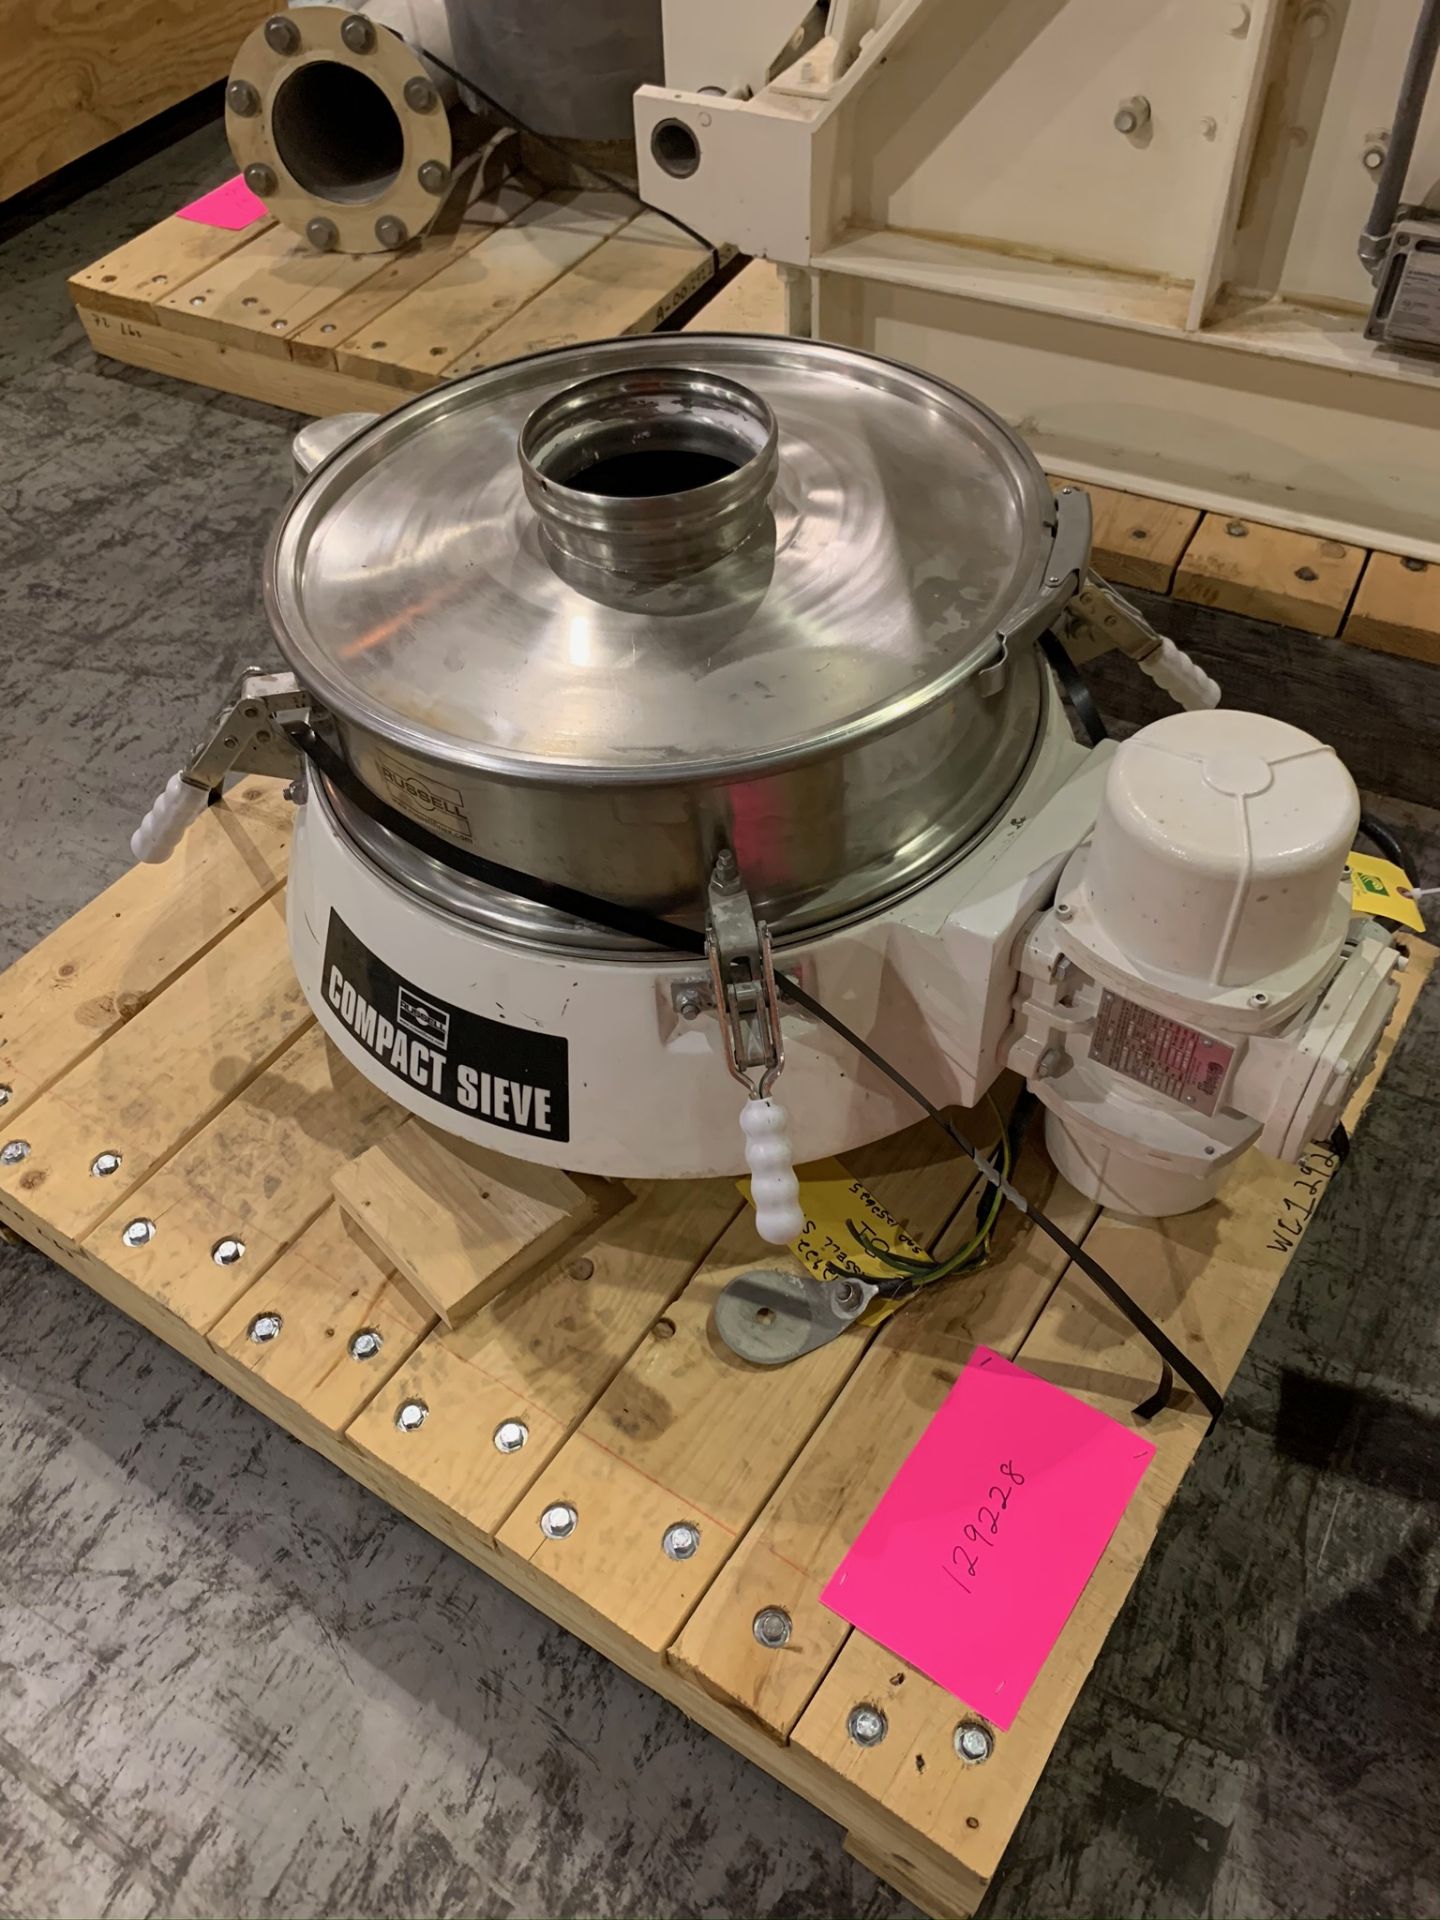 Russell Compact Sieve Model 17240 S/N DF3918 (Rigging Fee - $50) - Image 2 of 4